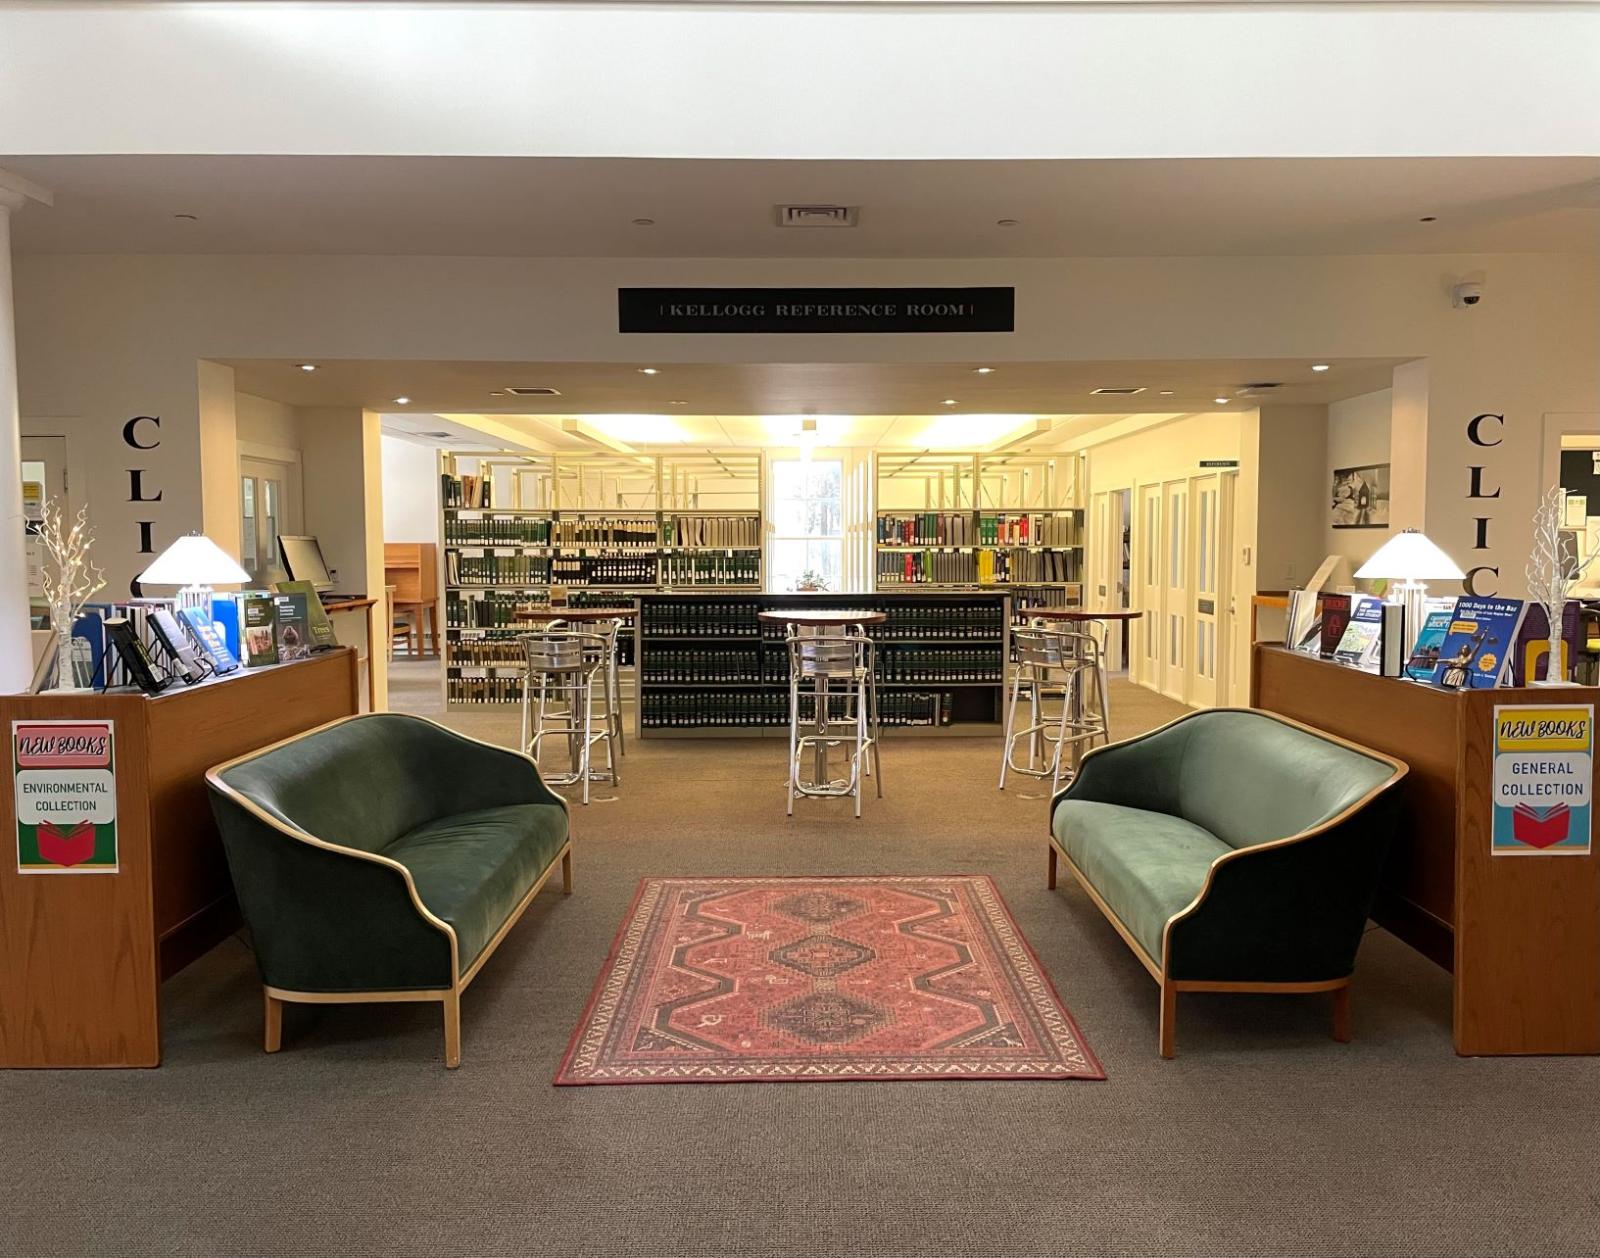 the library lobby provides comfortable seating and new book displays